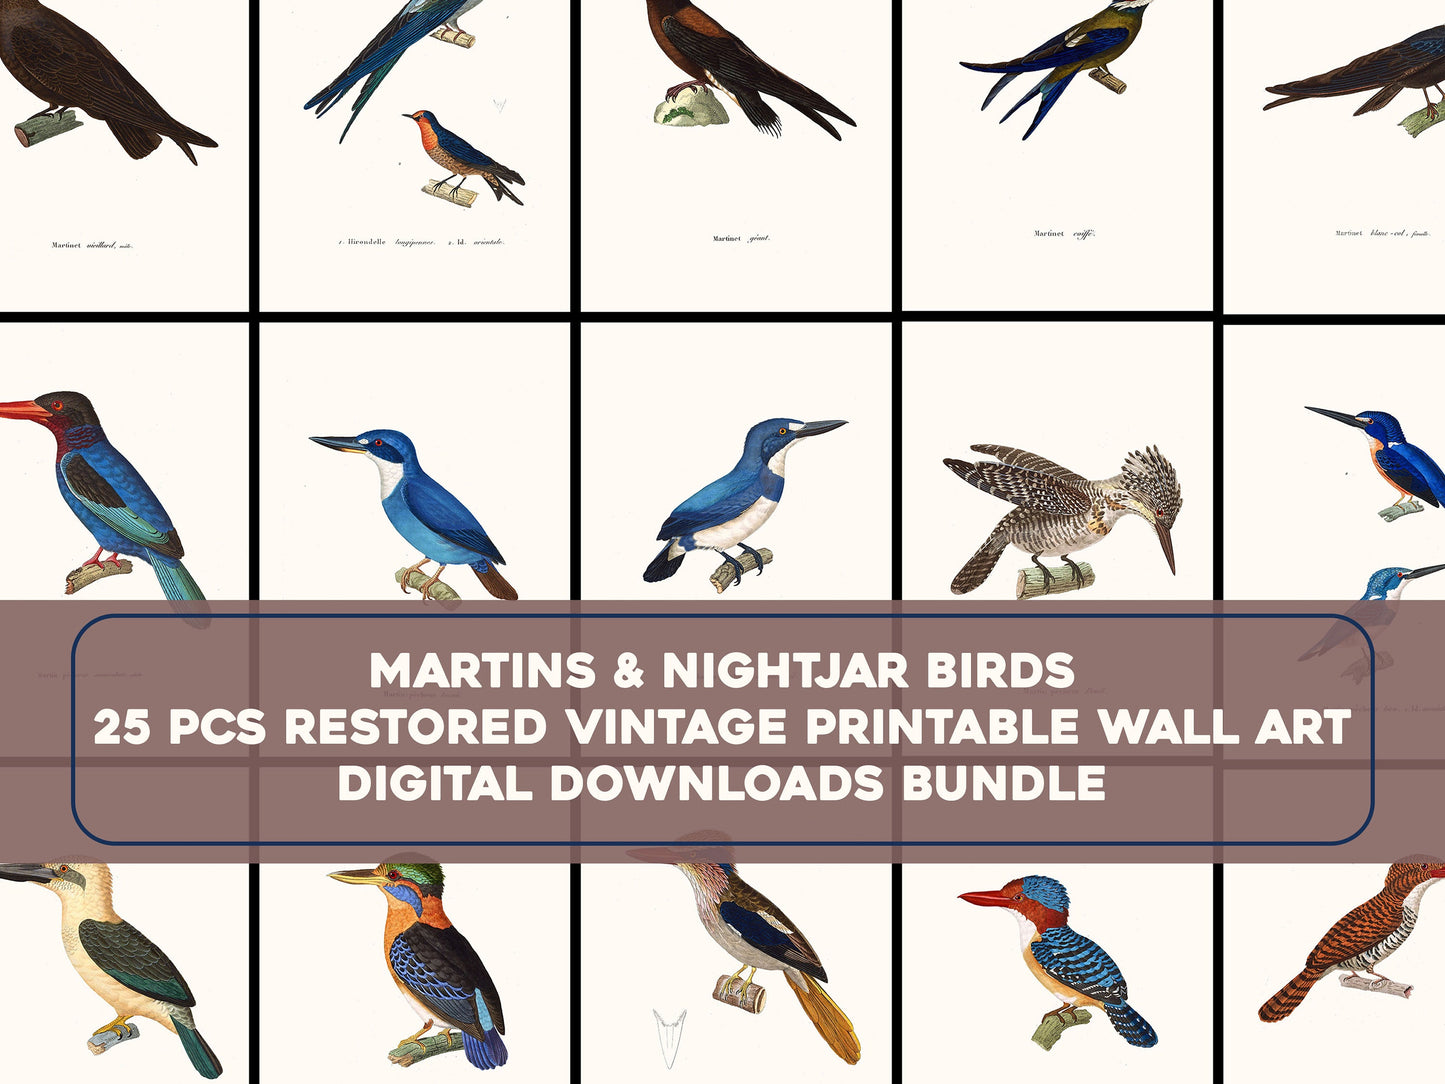 The New Collection of Painted Birds Nightjars & Martins [25 Images]